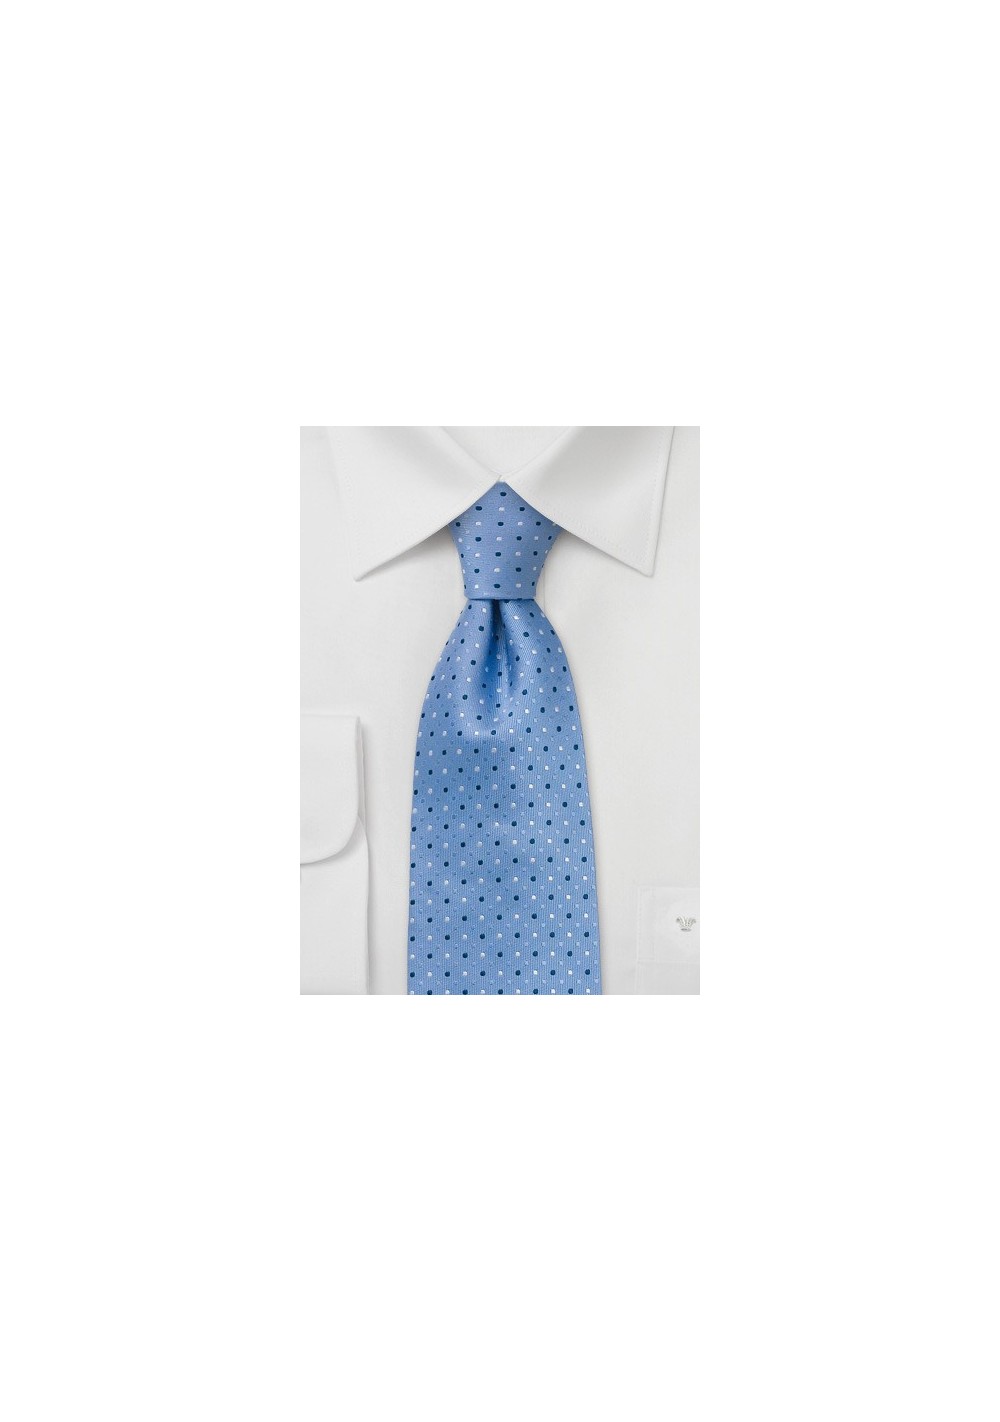 Light blue tie with small polka dots - Silk tie with blue and white polka dots